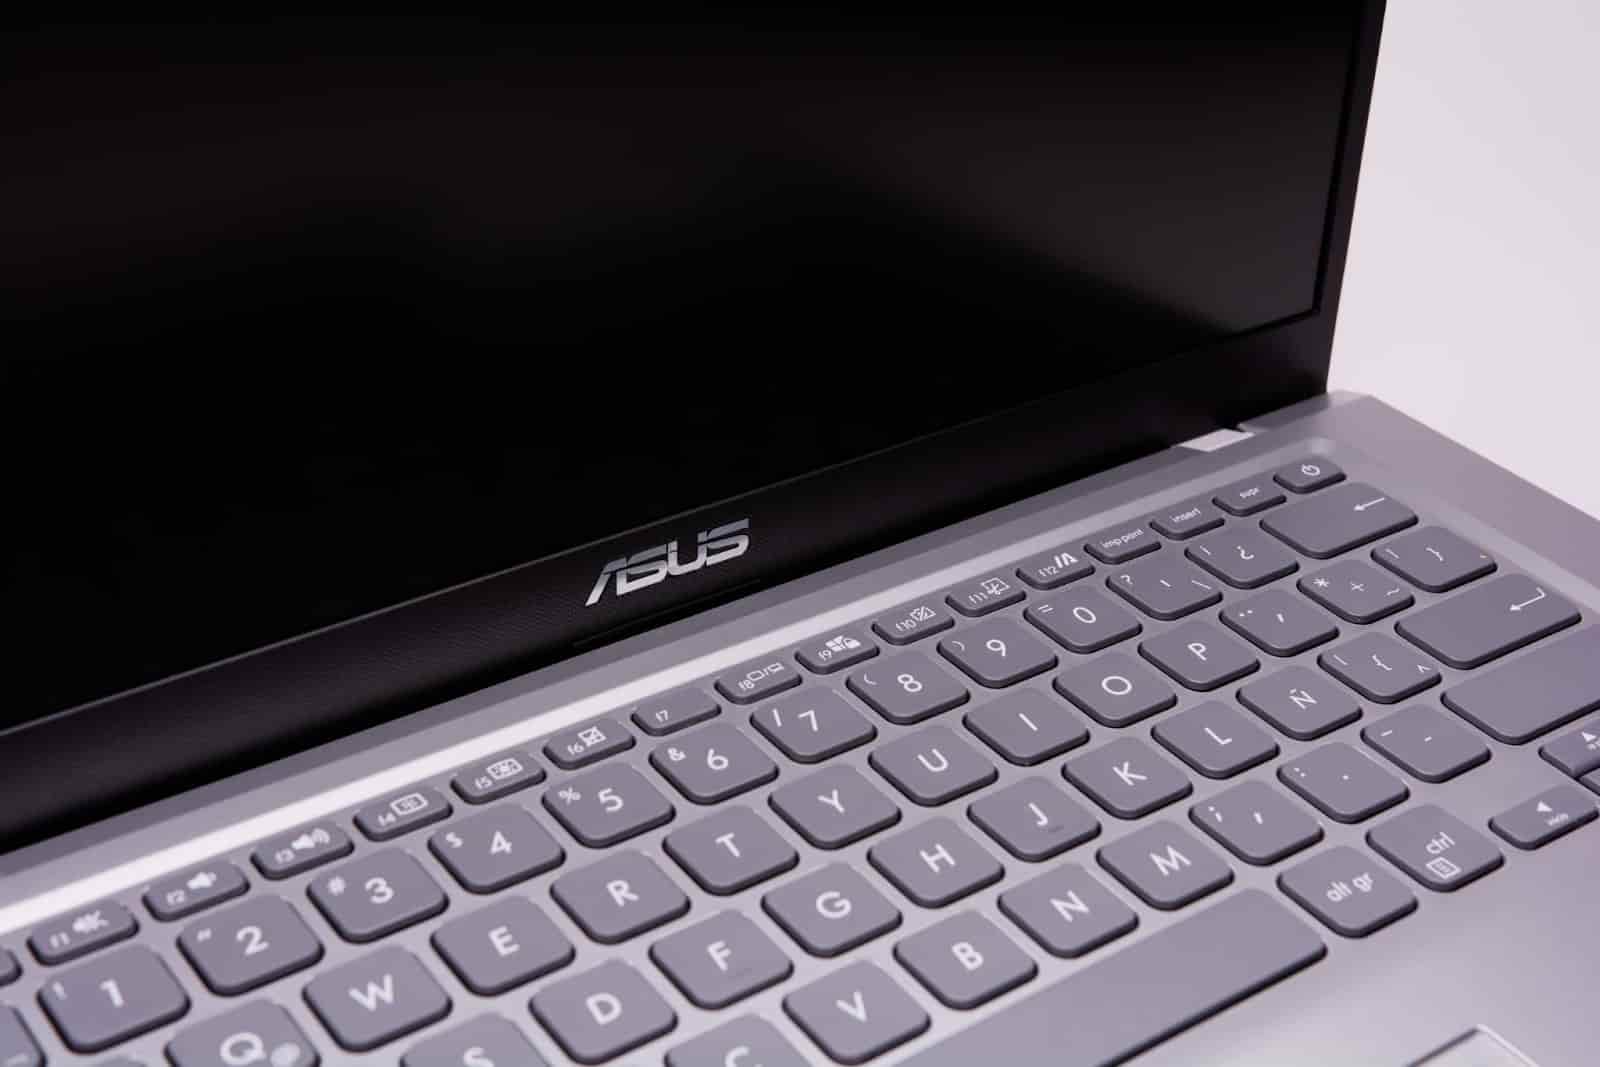 How To Restore My ASUS Ultrabook To Factory Settings